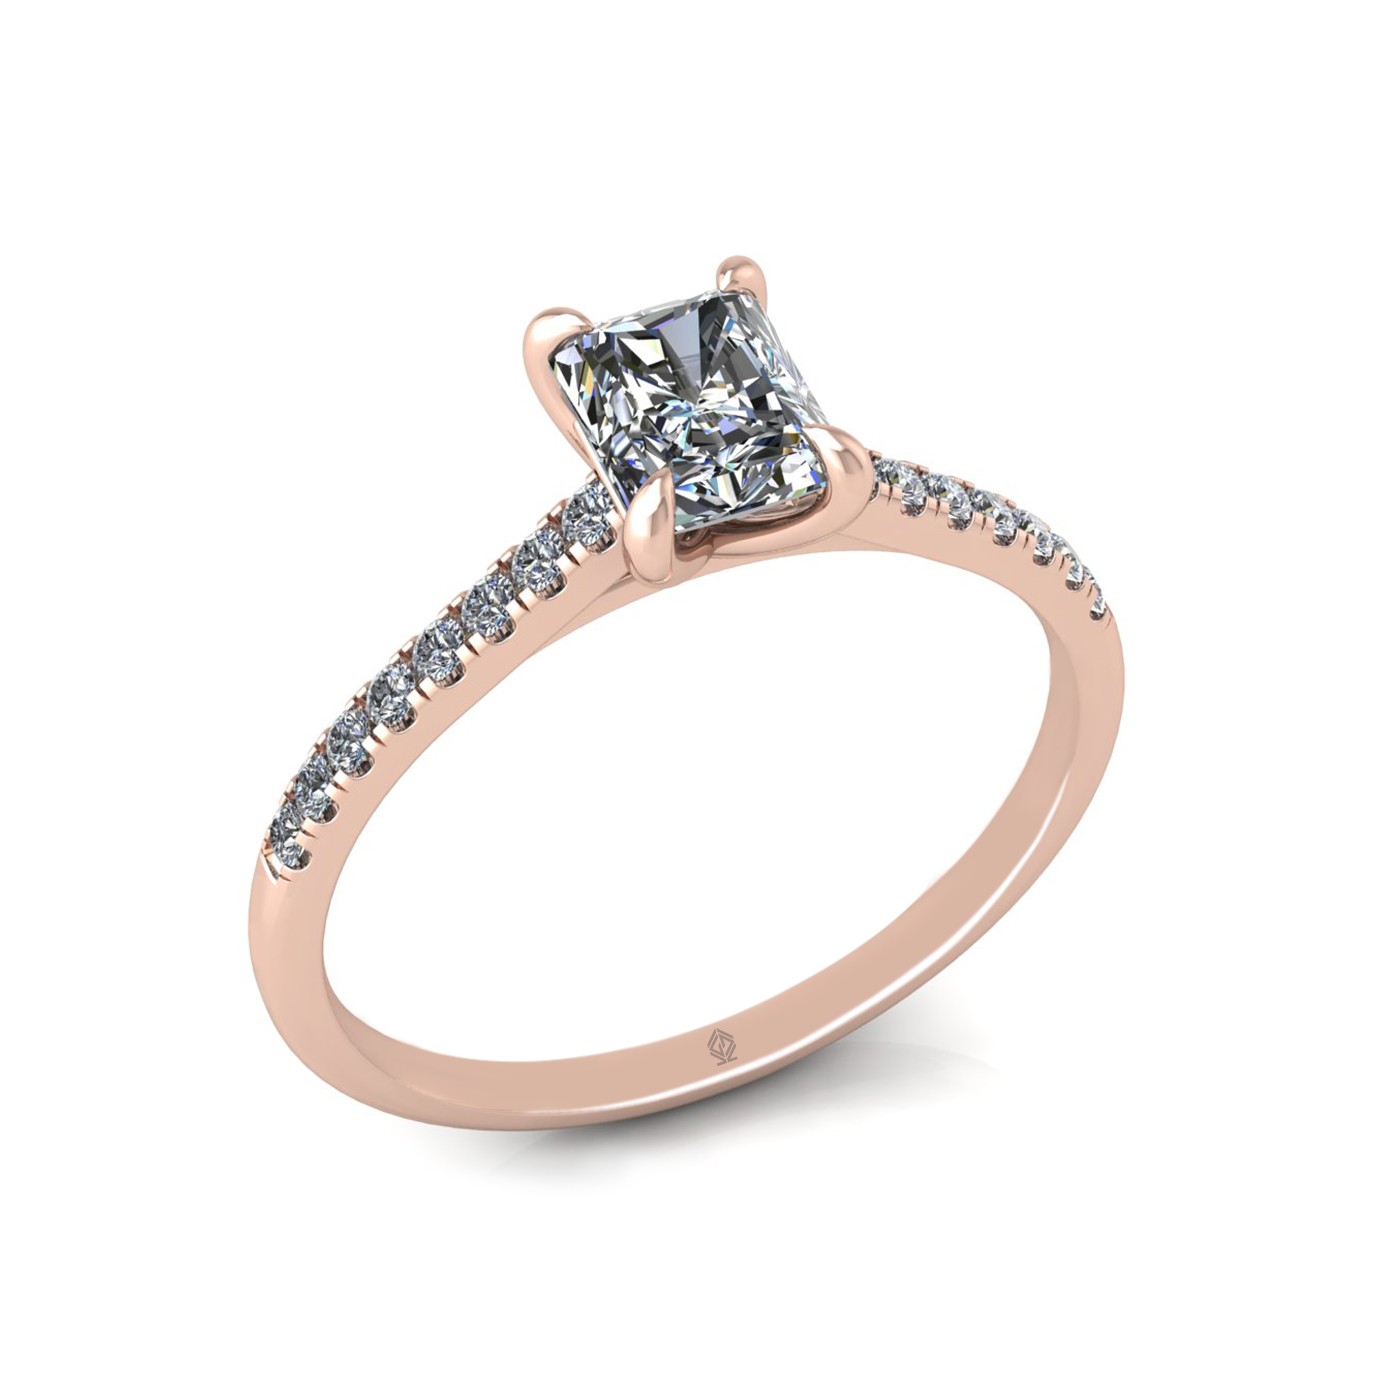 18k rose gold  0,80 ct 4 prongs radiant cut diamond engagement ring with whisper thin pavÉ set band